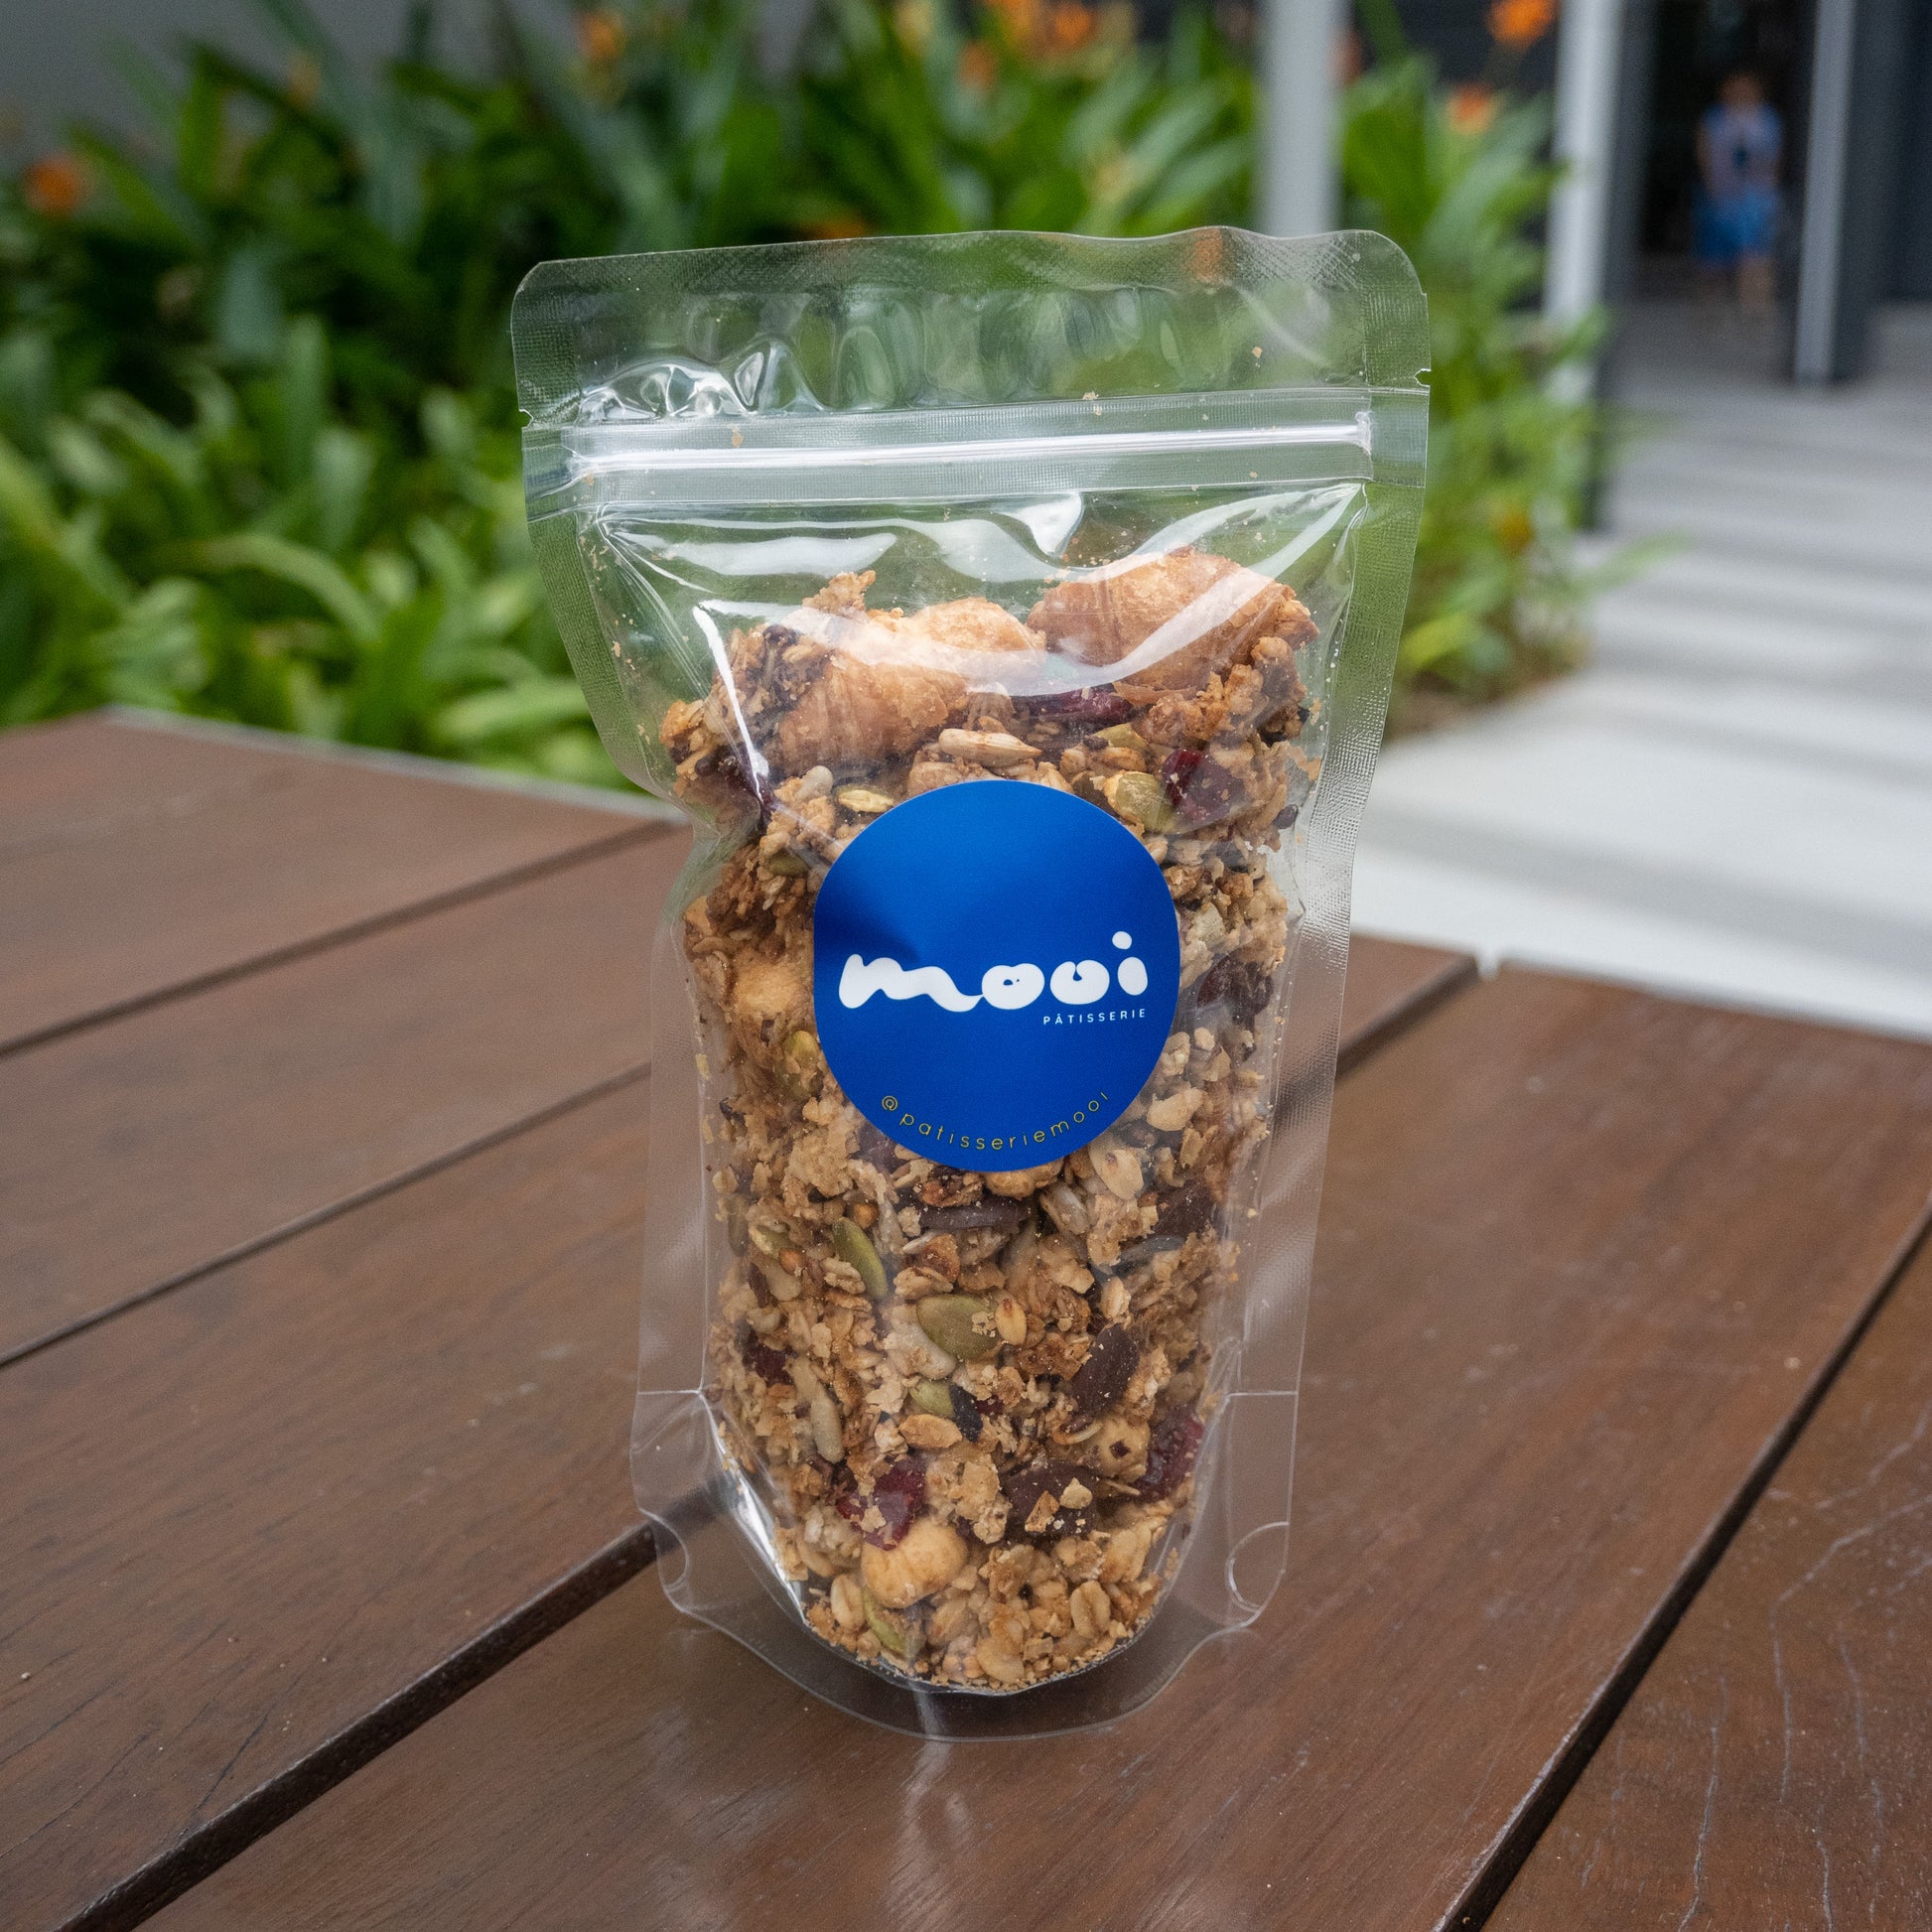 House-made granola with nuts, seeds, dried fruits and mini croissants served in a bag.